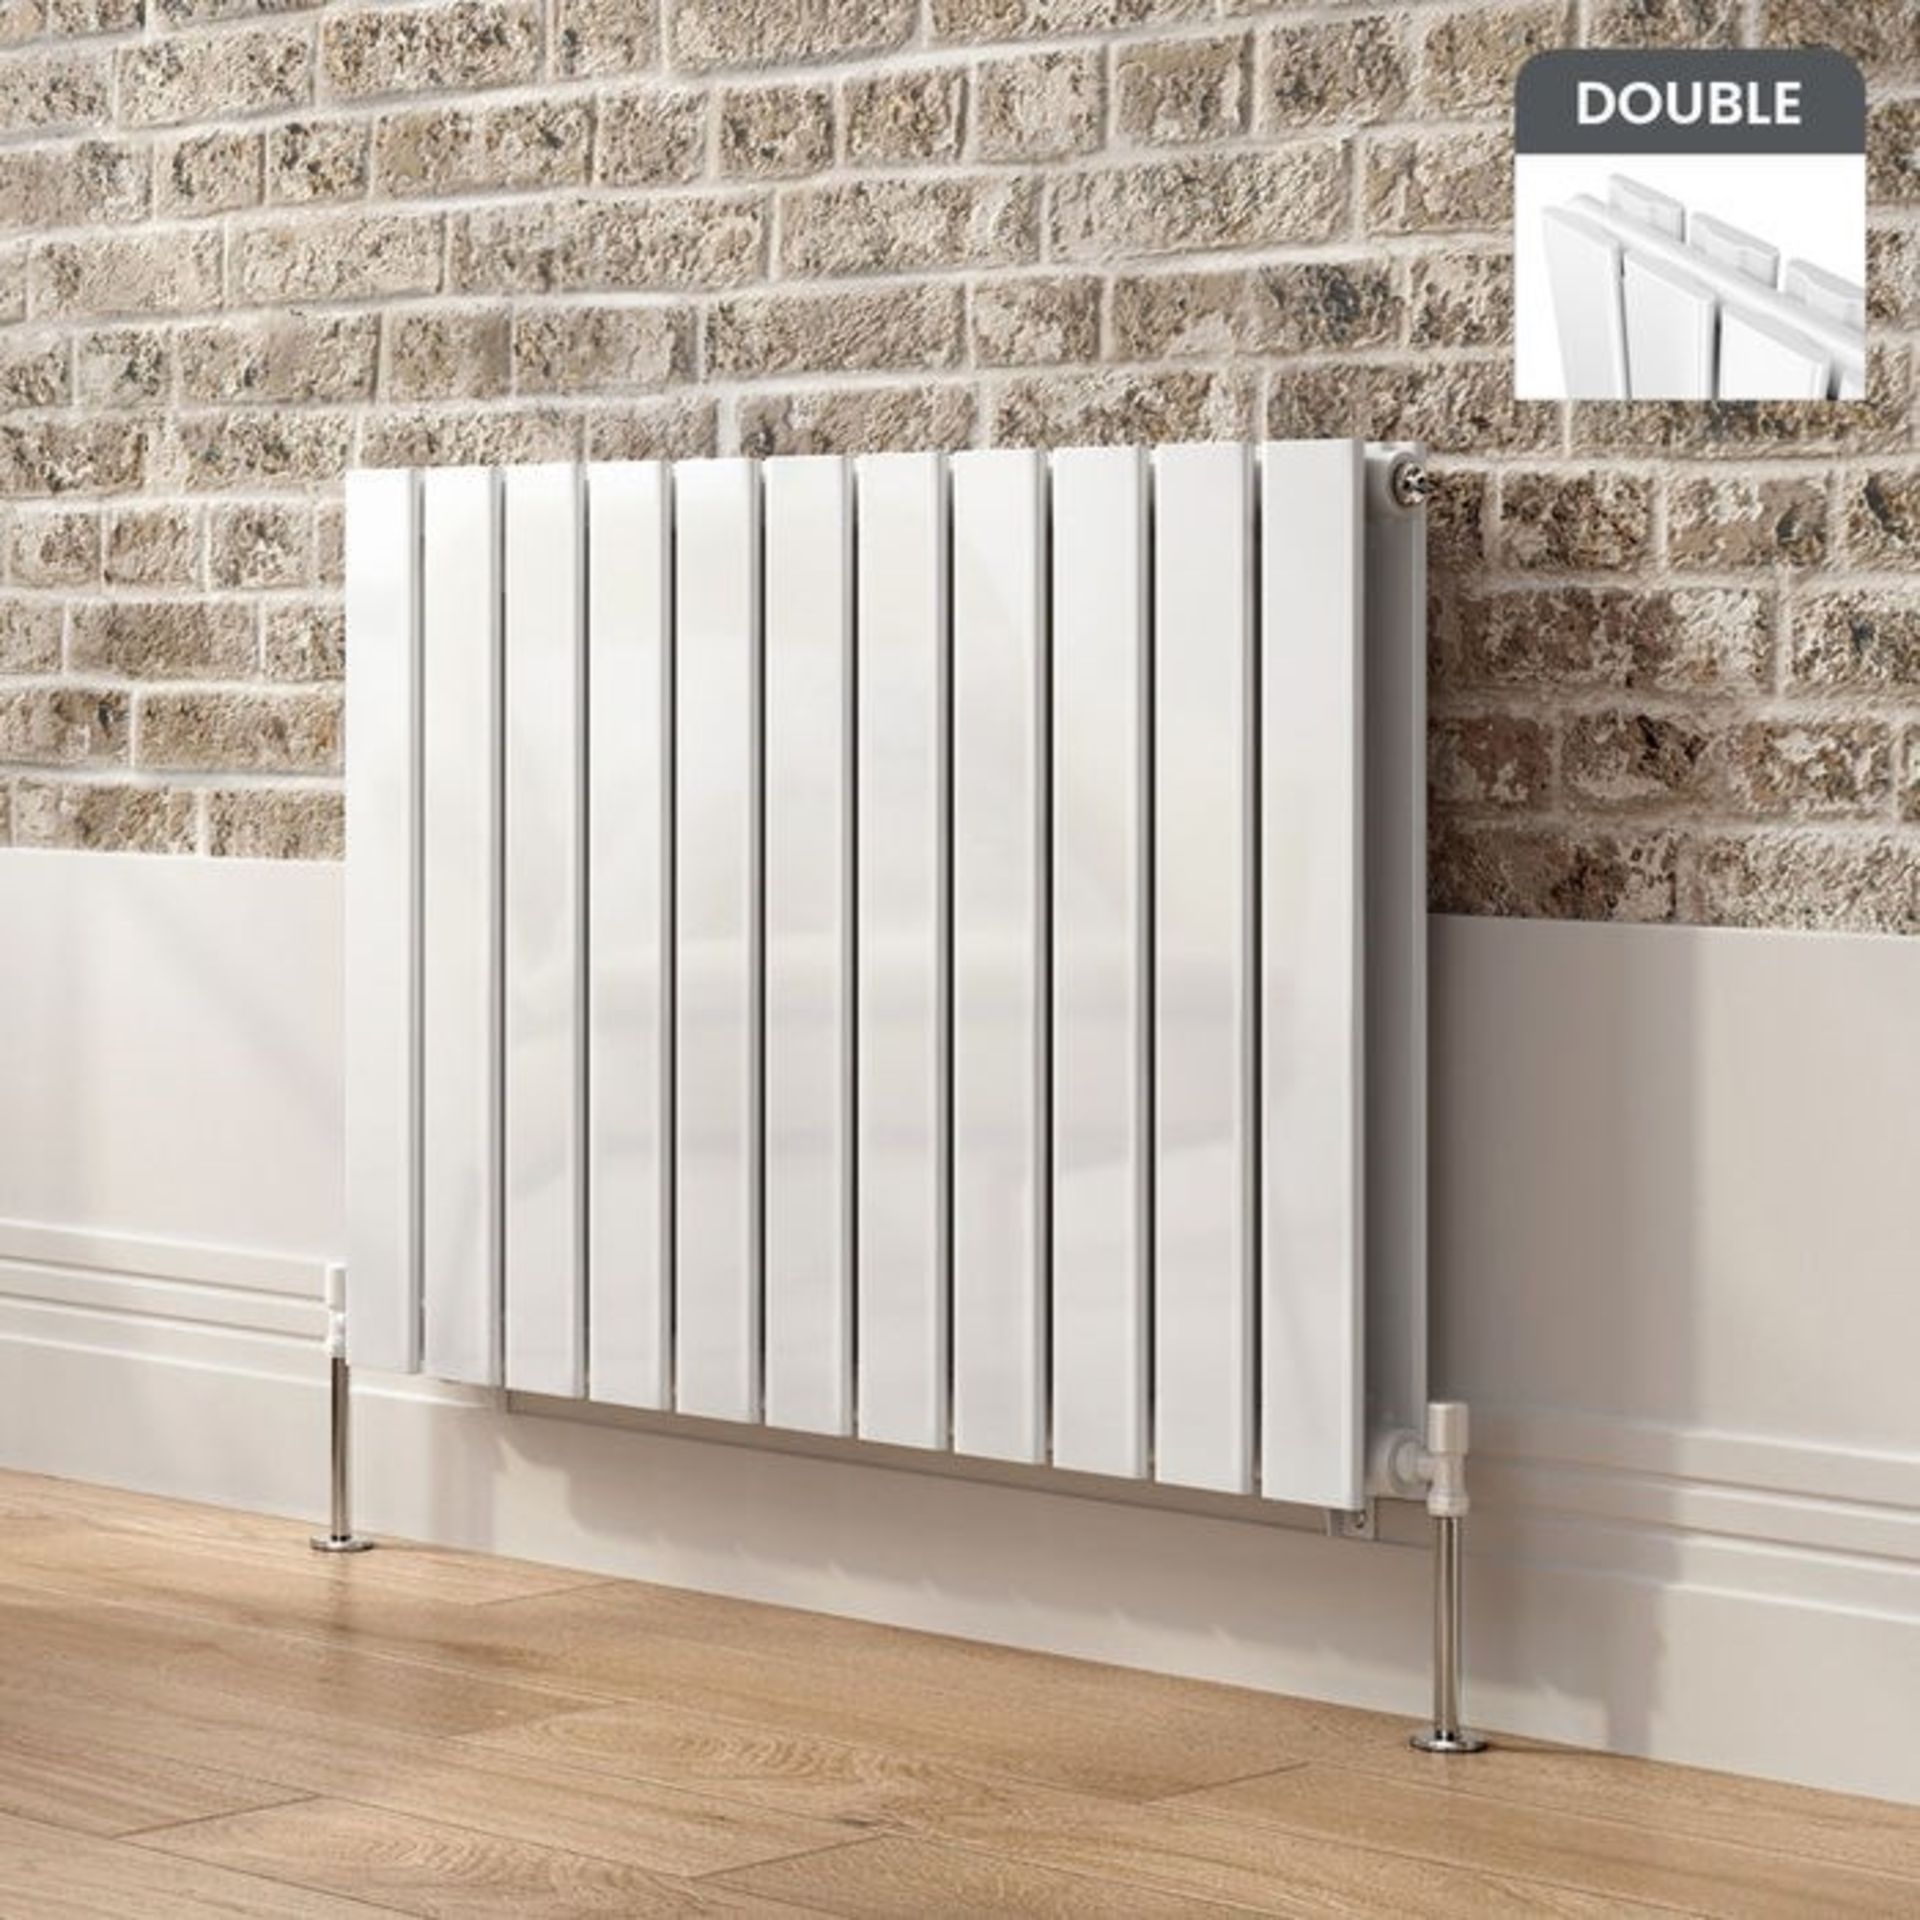 600x830mm Gloss White Double Flat Panel Horizontal Radiator. RRP £474.99.RC221.Made with high... - Image 3 of 4